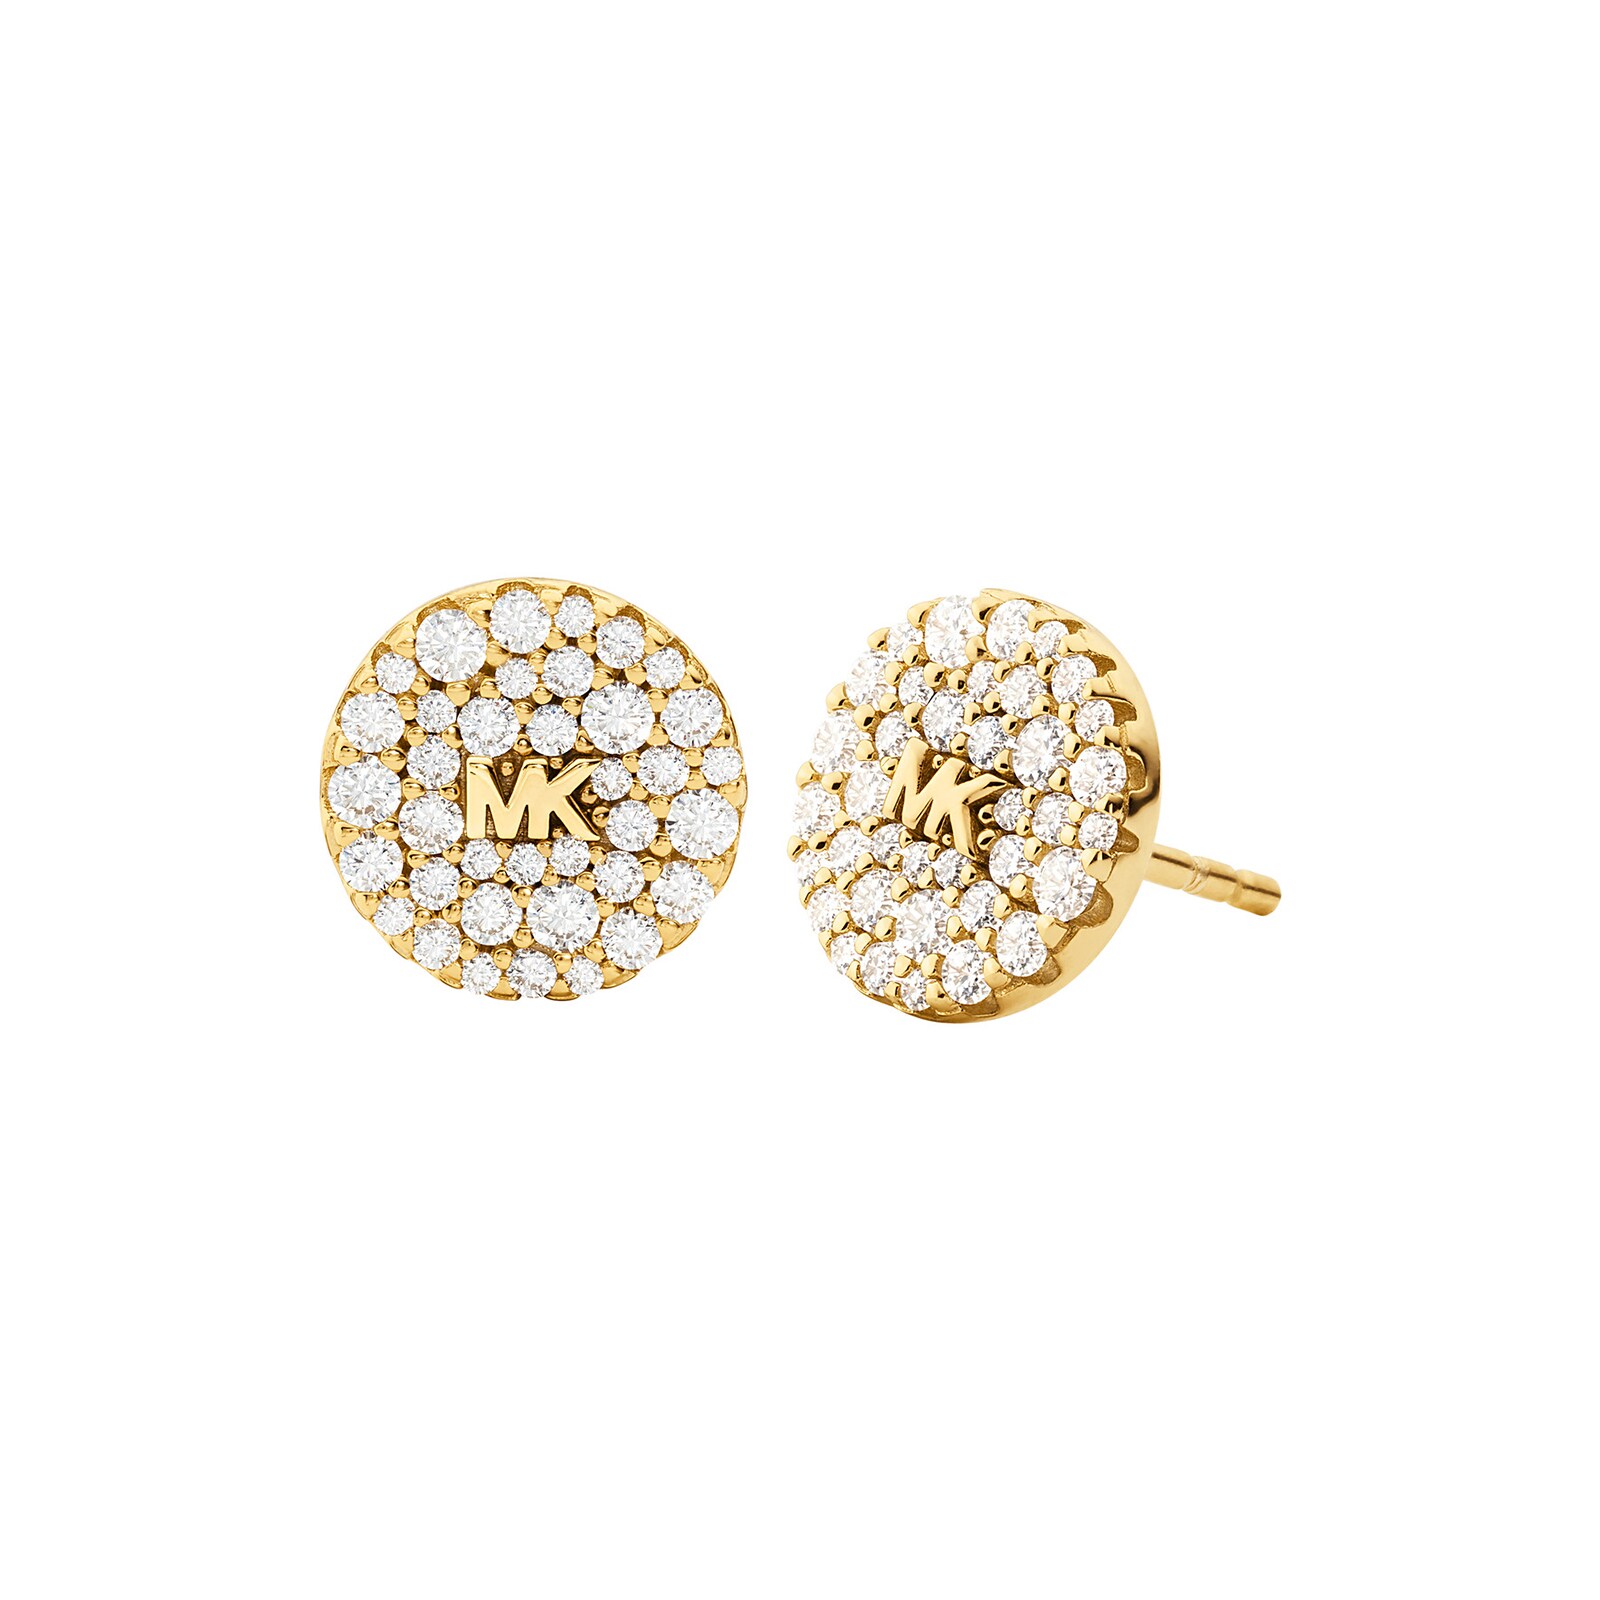 Michael Kors Yellow Gold Plated Crystal Stud Earrings MKC1496AN710   Goldsmiths